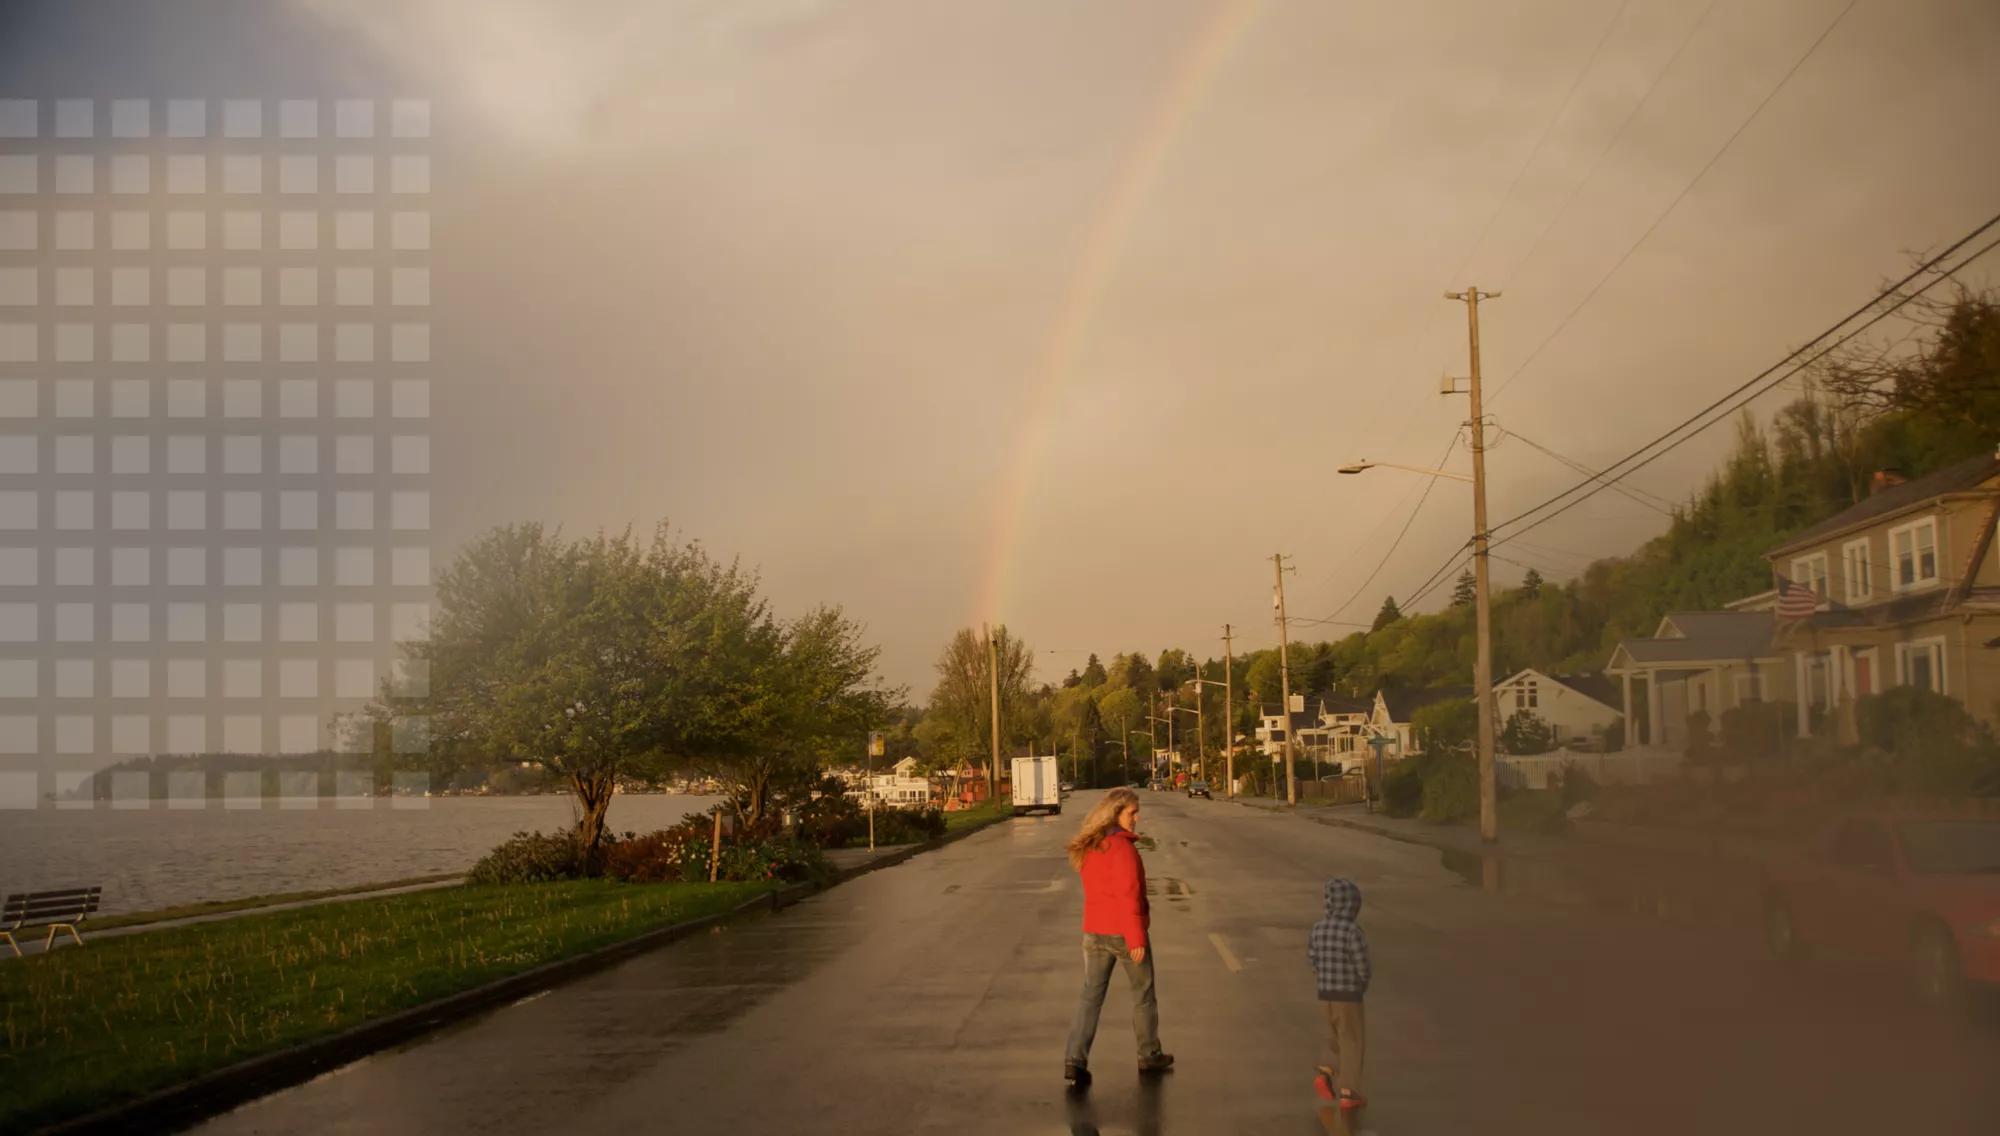 Mother and son walking with zest in their community along the water on a drizzly day with a rainbow on the horizon.